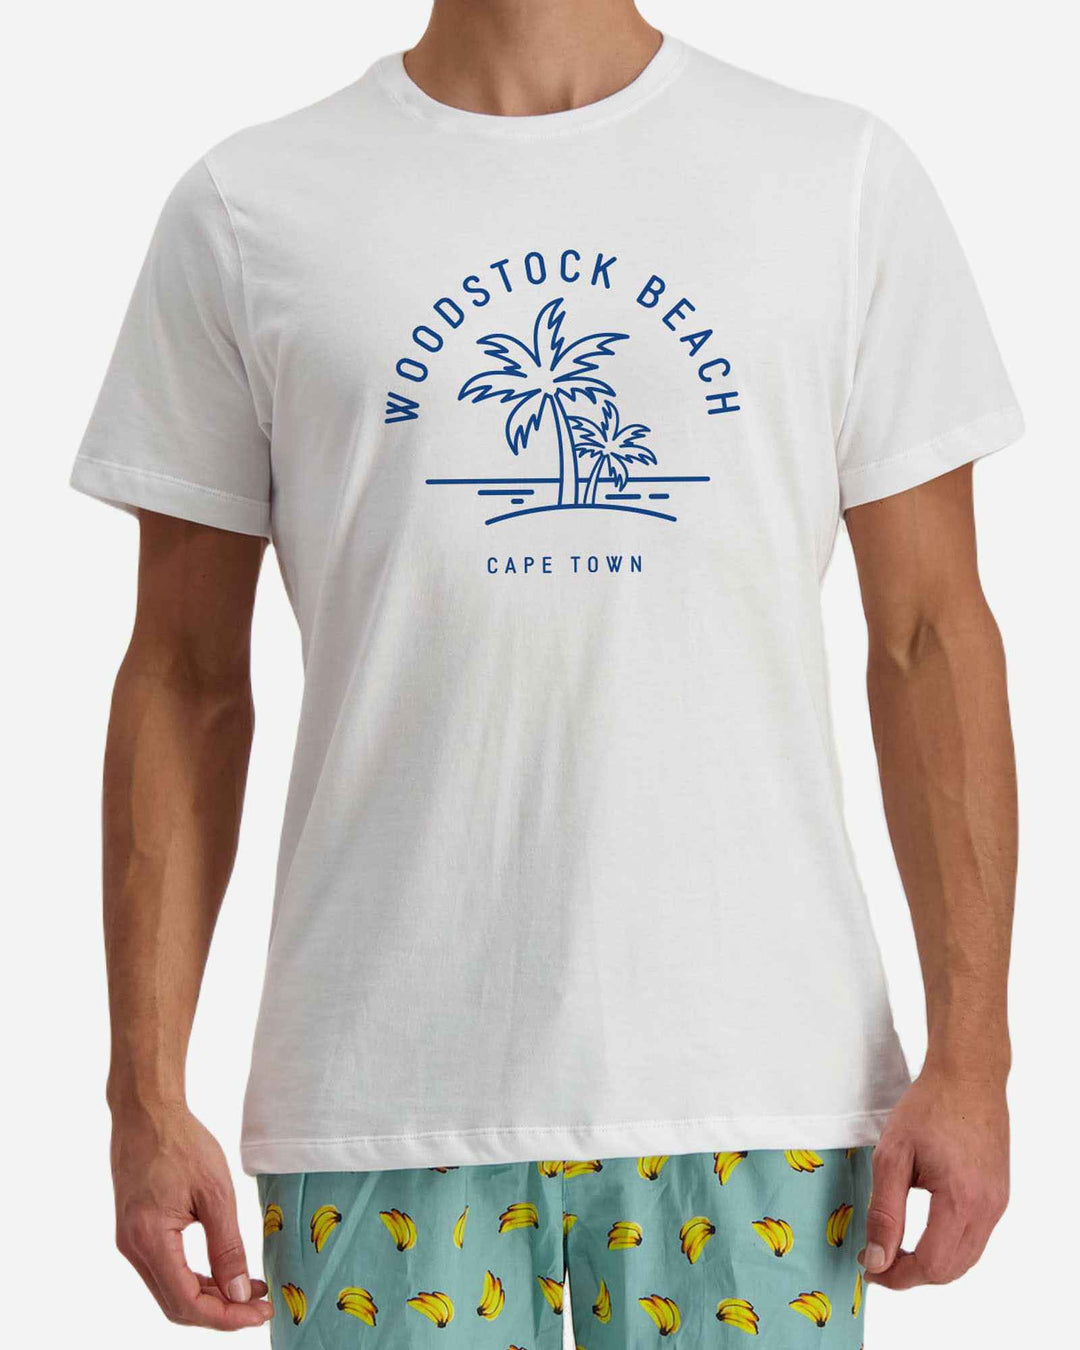 Mens white t-shirts with Woodstock Beach print